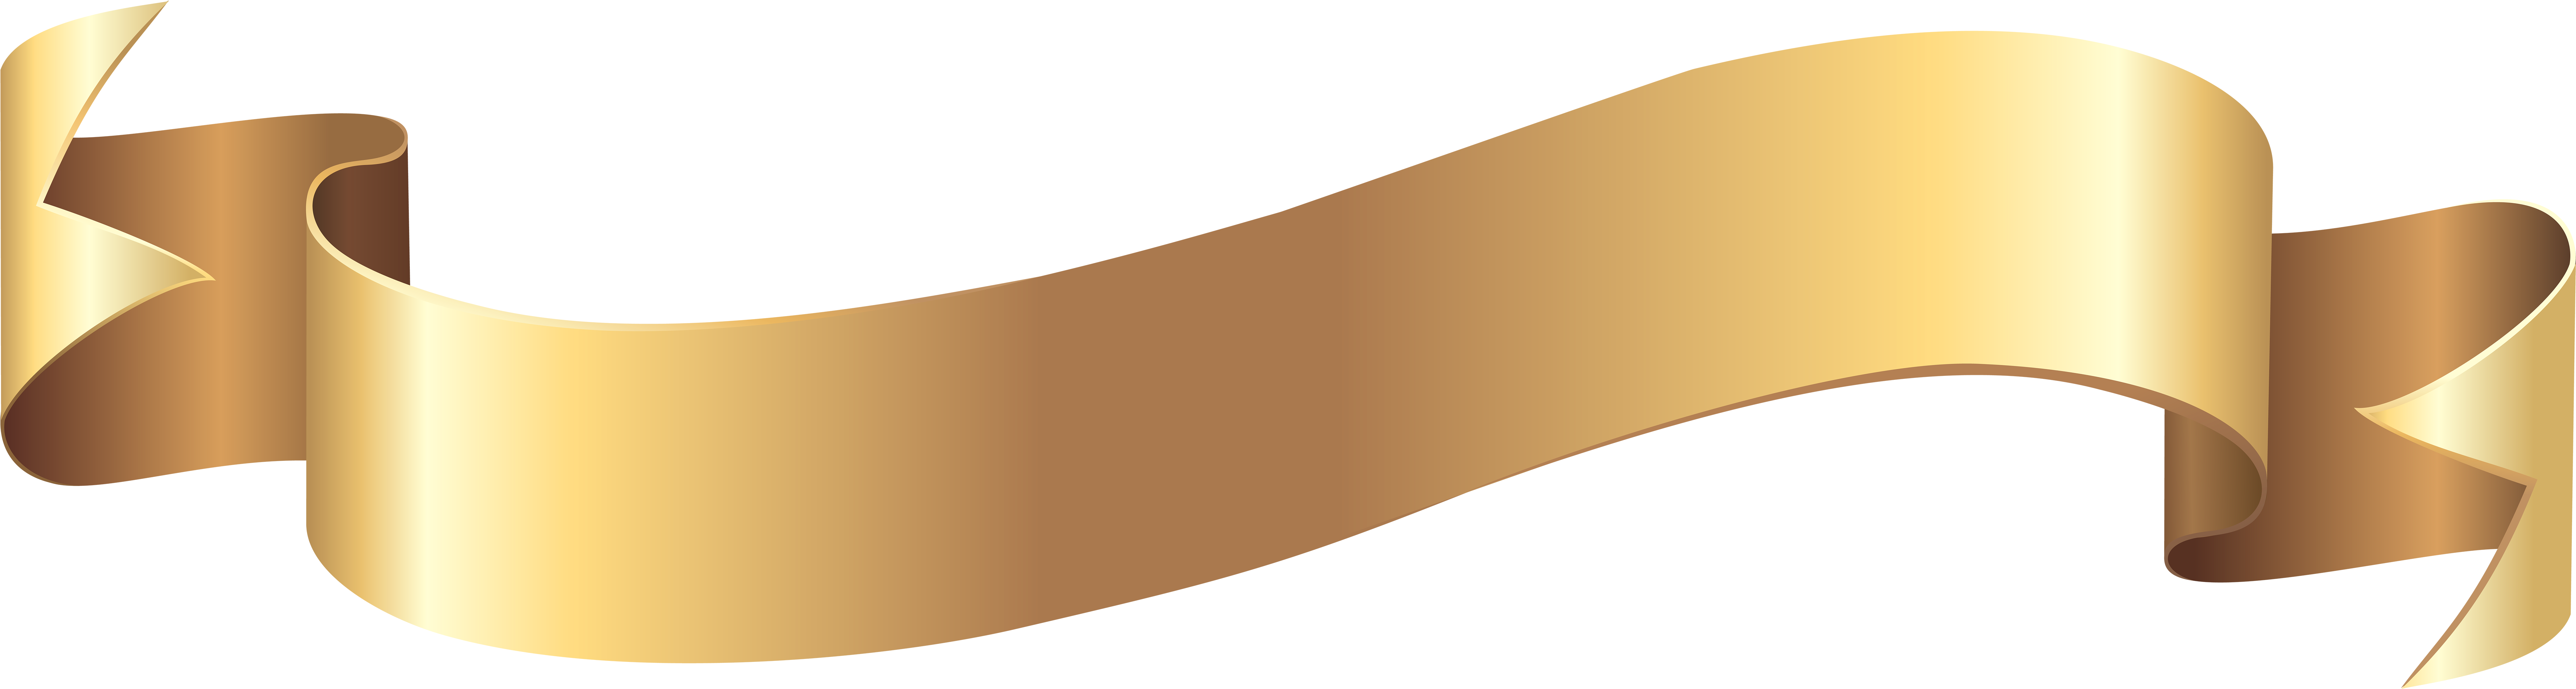 Gold Banner Png Clip Art Image - Silver Ribbon Banner Png (8000x2176)